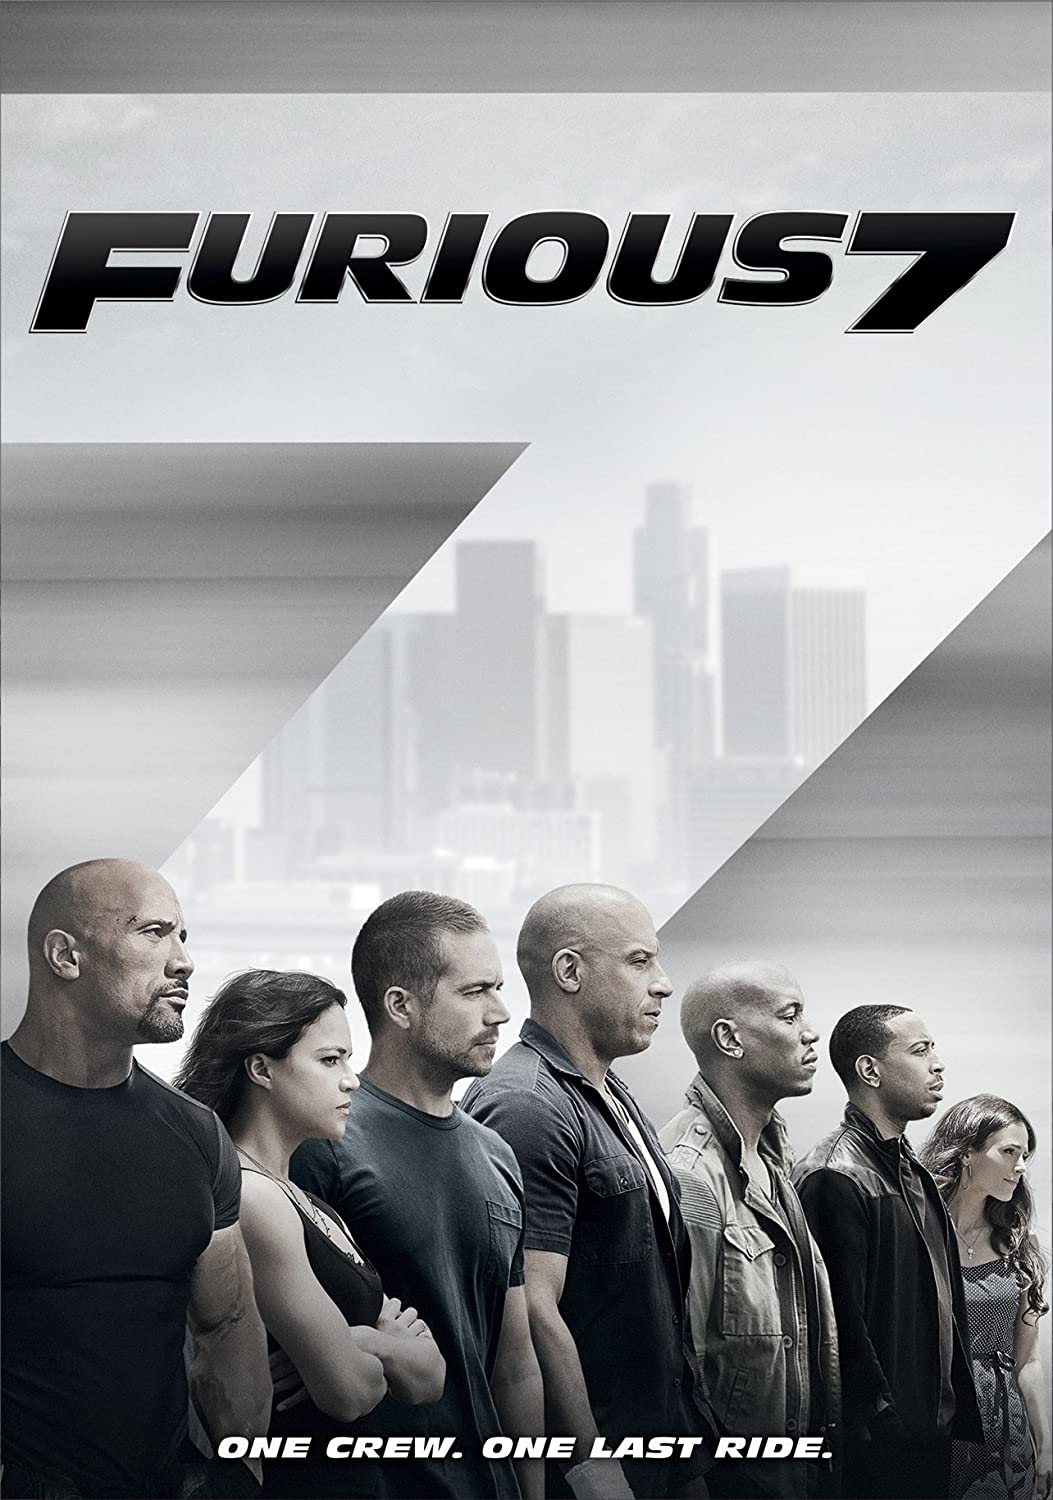 Download Fast And Furious 7 (2015) (Dual Audio) Blu-Ray Movie In 480p [500 MB] | 720p [1.4 GB] | 1080p [3.6 GB]